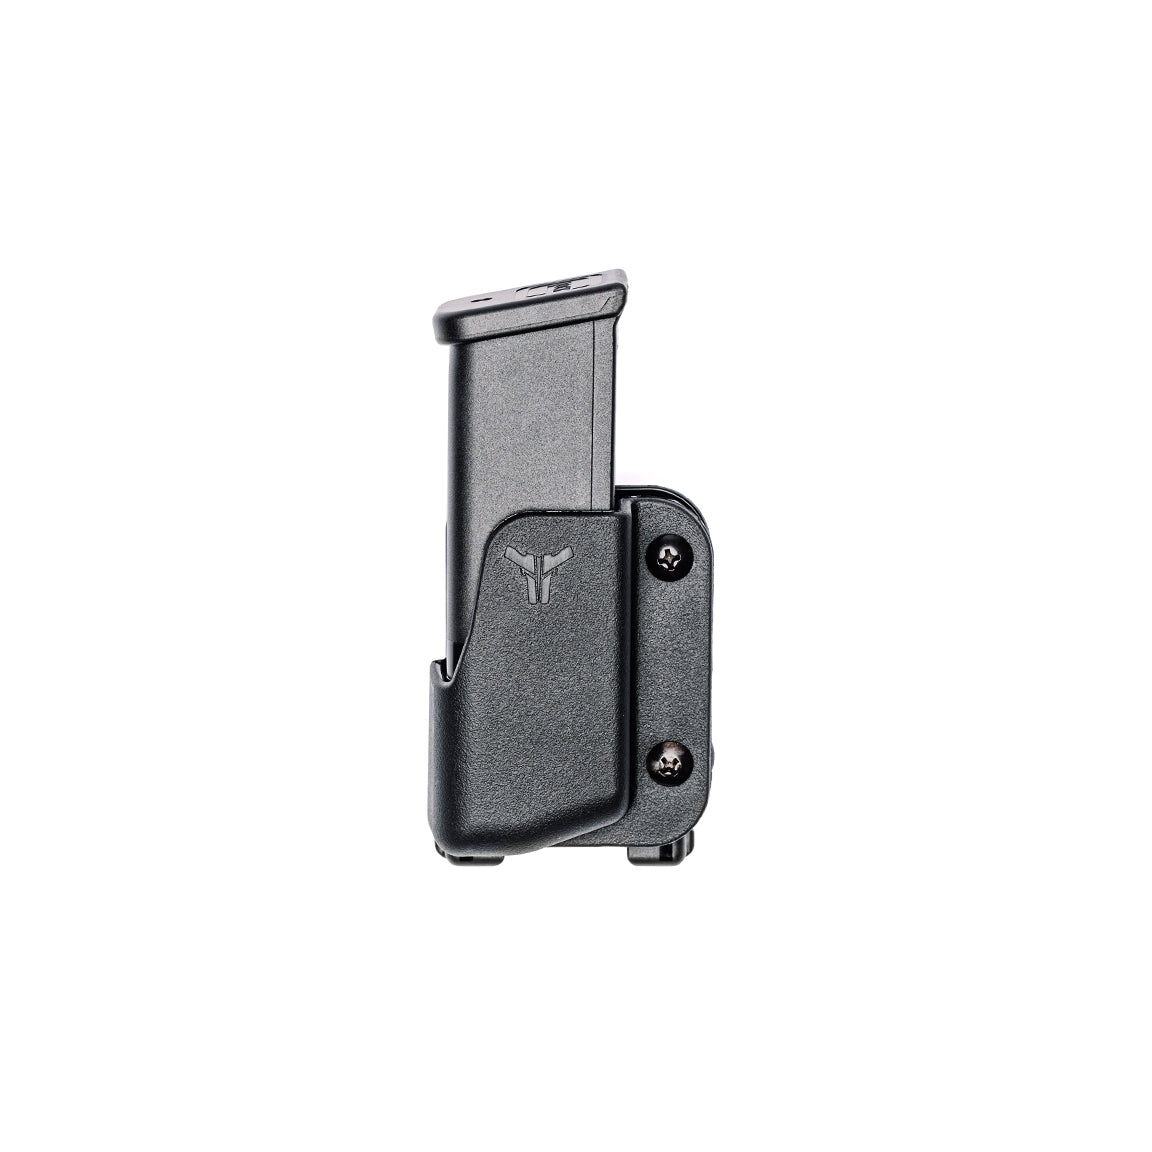 Blade-Tech Signature Mag Pouch Pro for right-handed shooters